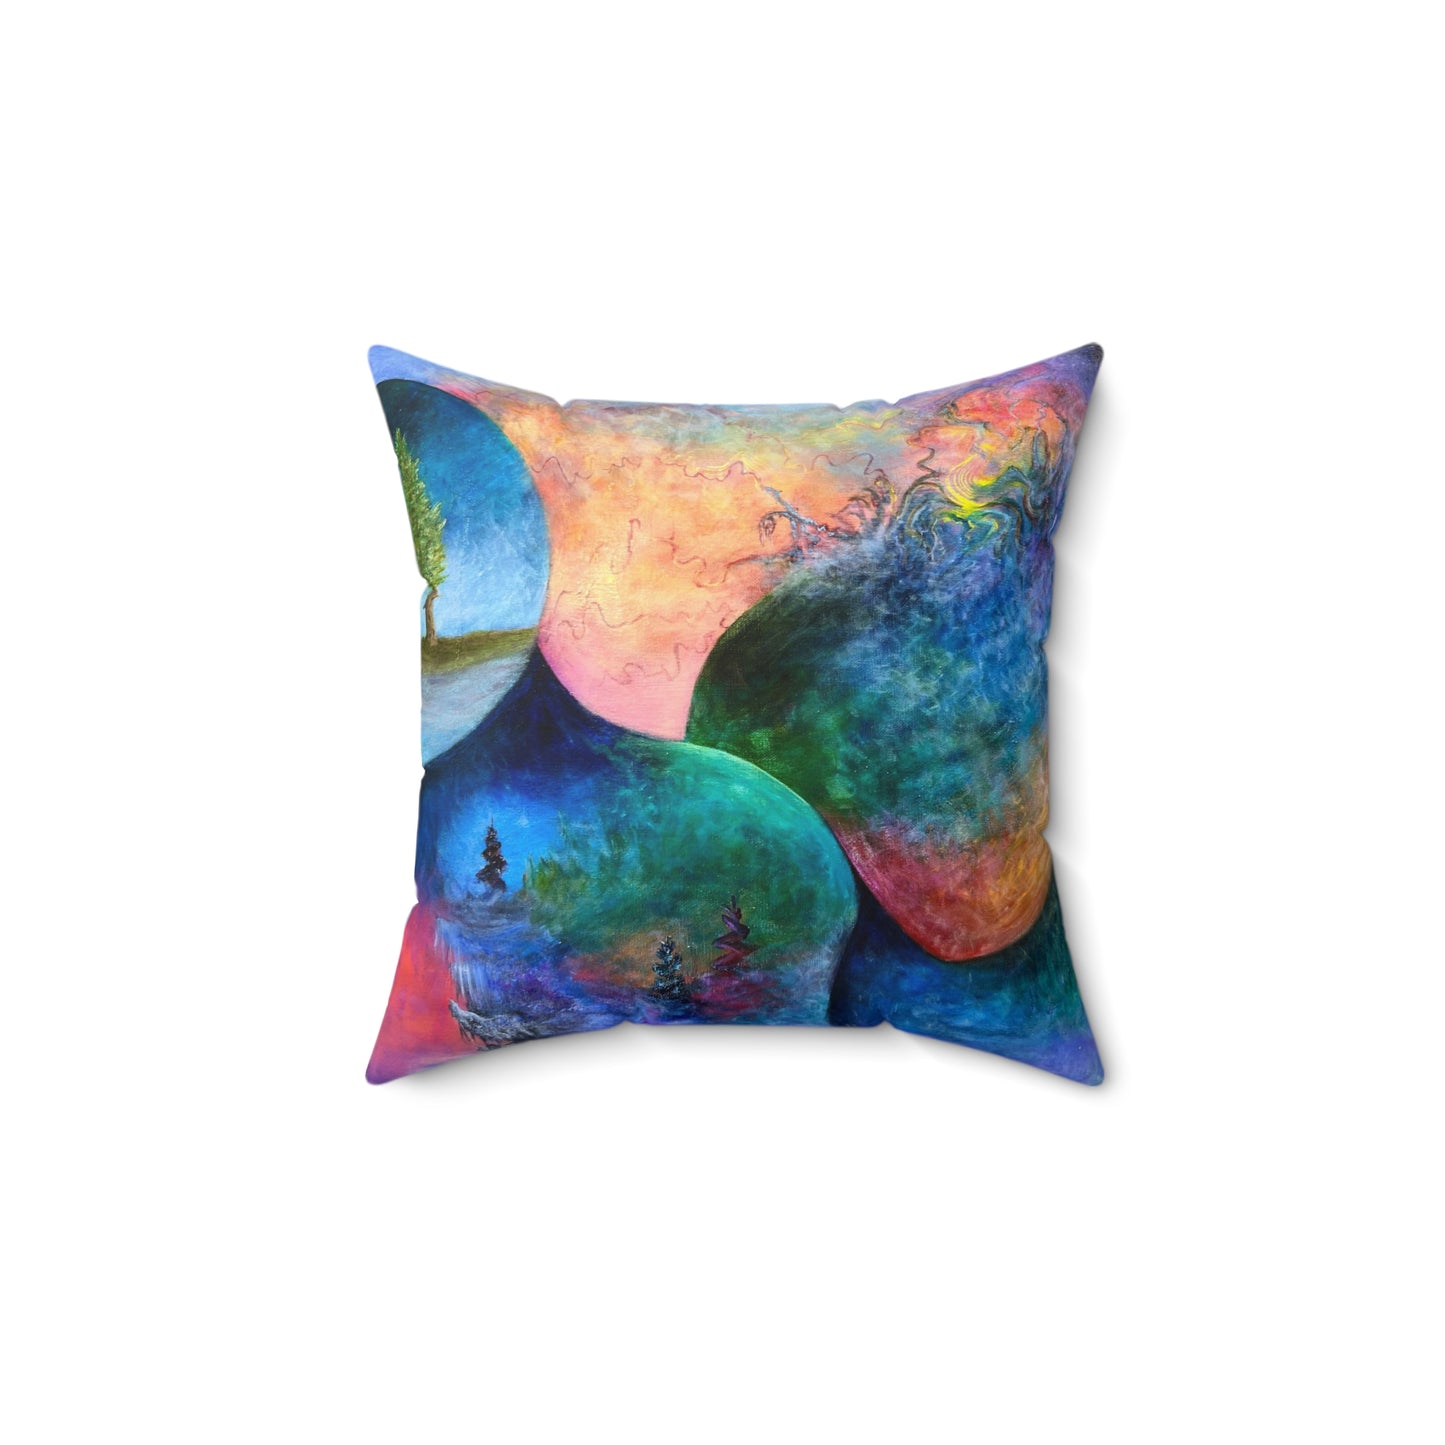 Wandering Pines Throw Pillow